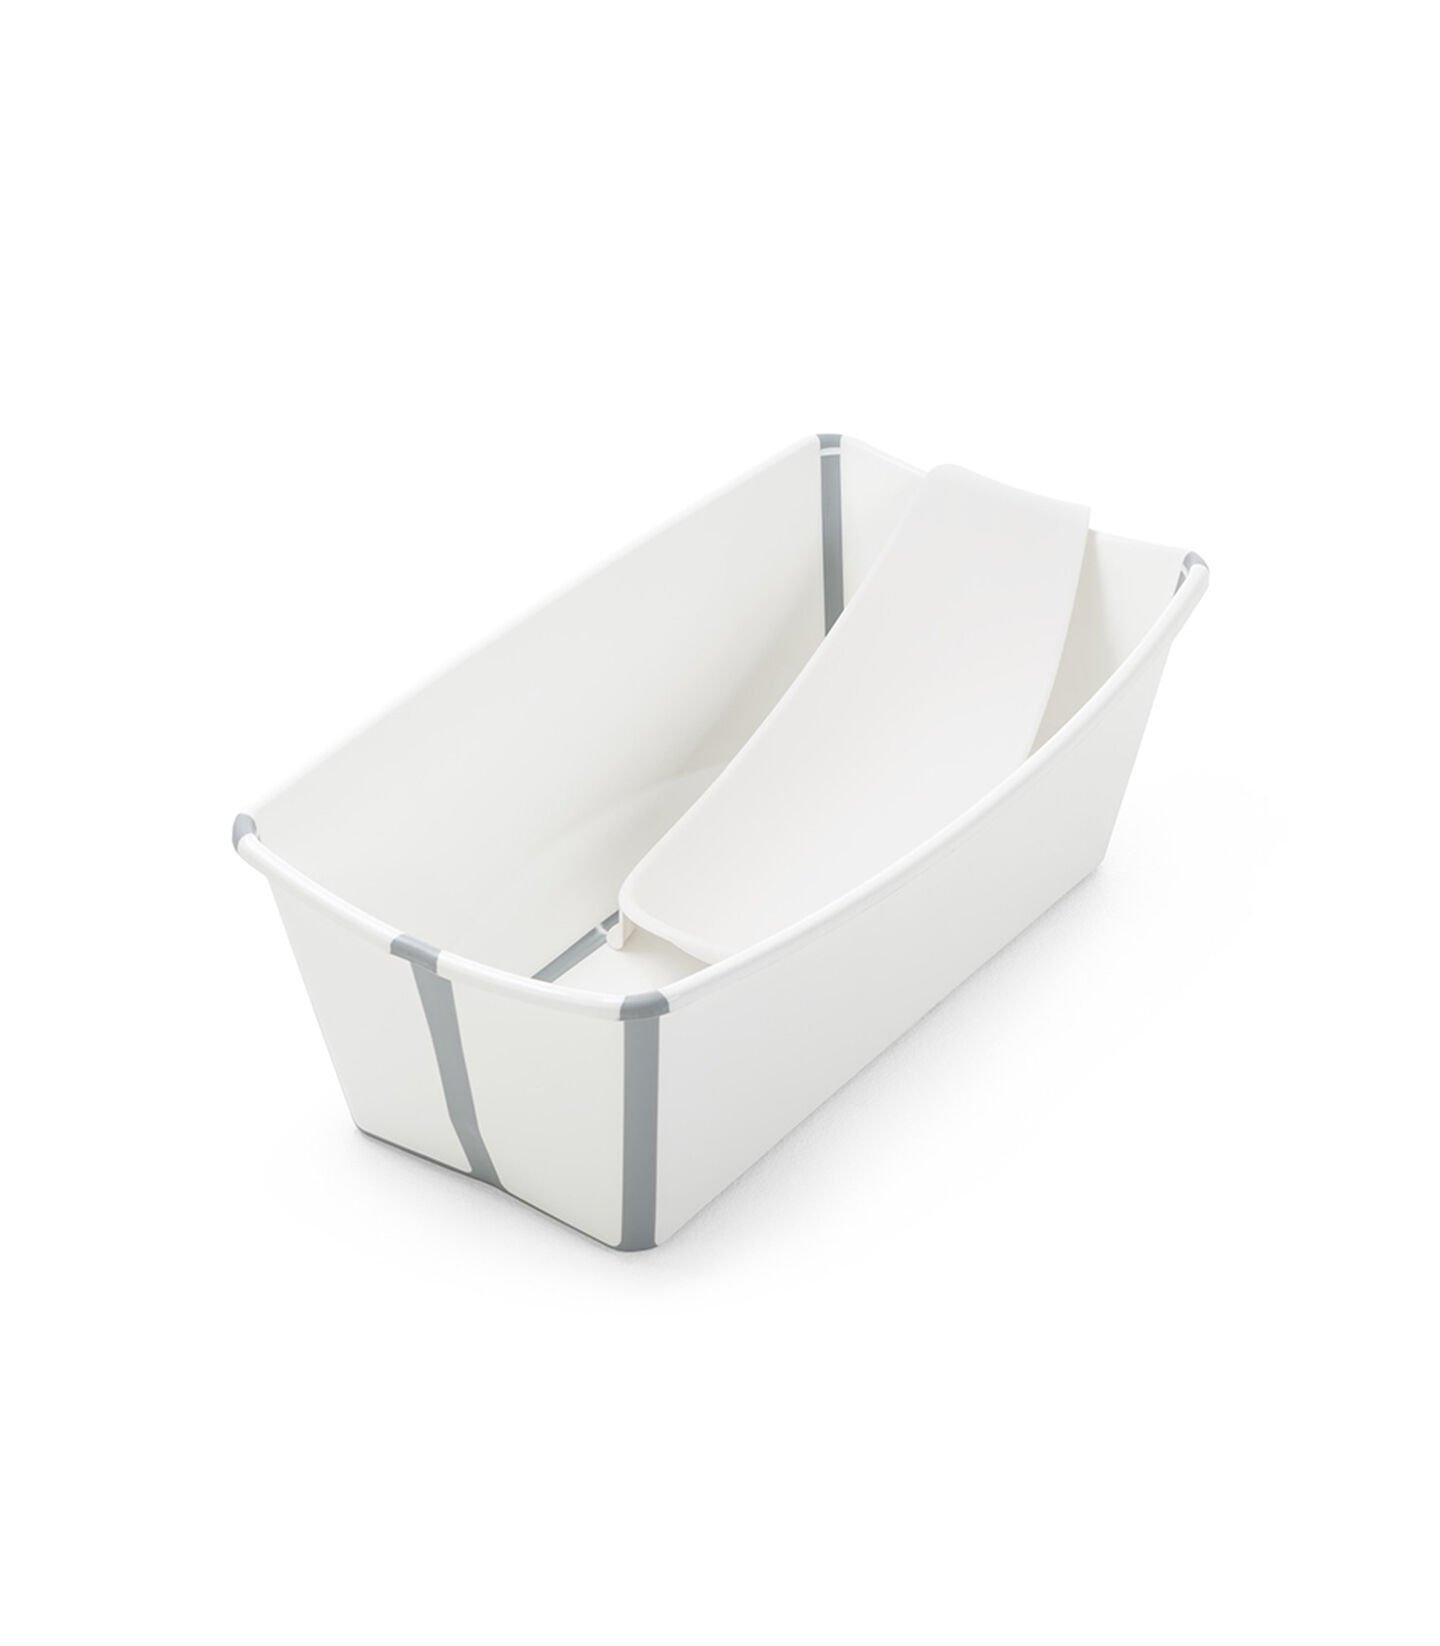 Stokke® Flexi Bath® Bundle Tub with Support White, Blanco, mainview view 1